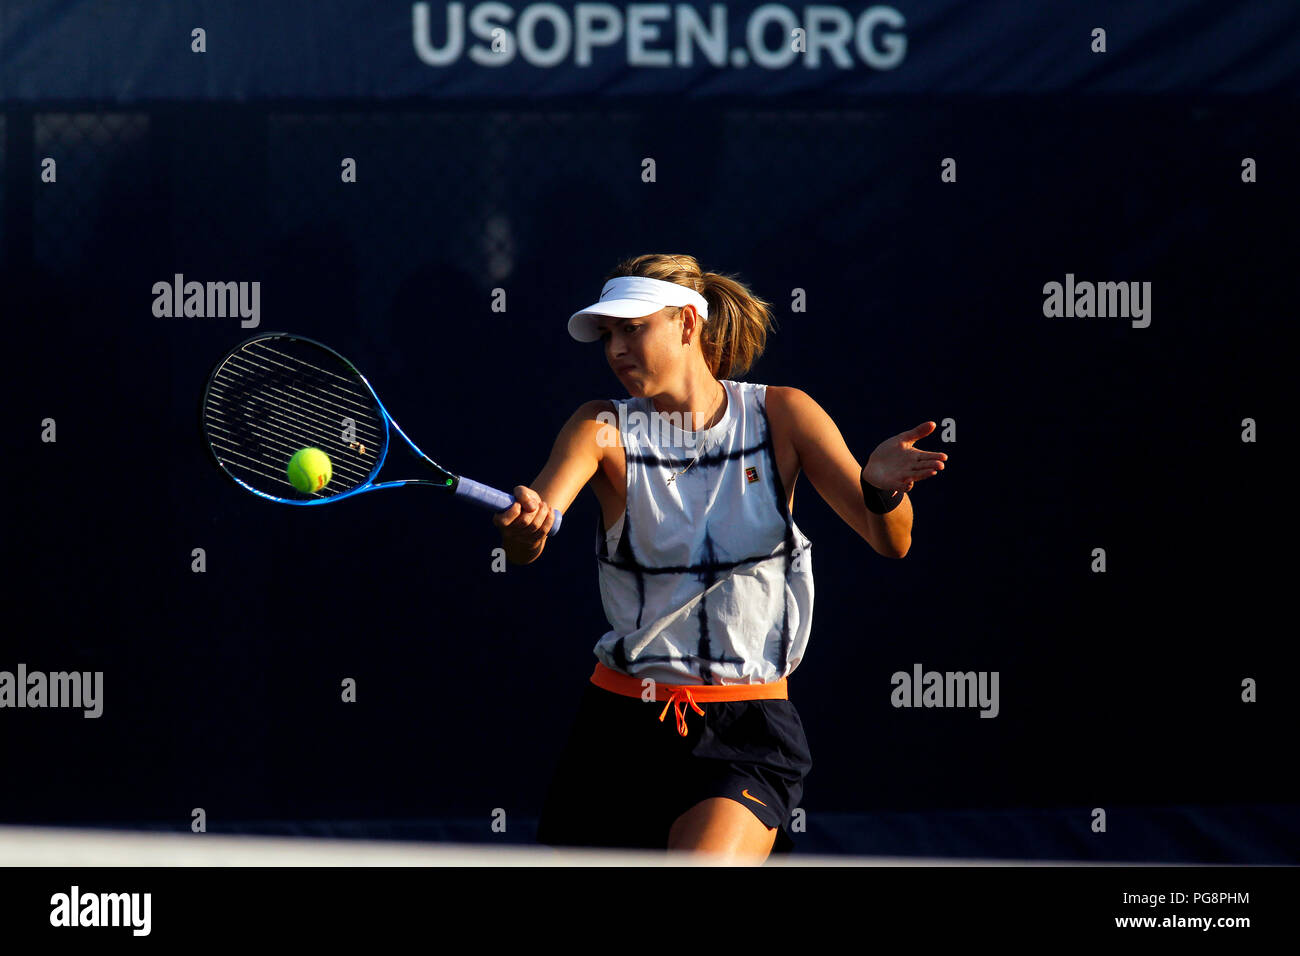 New York, USA, August 24, 2018 - US Open Tennis Practice:  Maria Sharapova strikes a forehand during  practice today at the Billie Jean King National Tennis Center in Flushing Meadows, New York, as players prepared for the U.S. Open which begins next Monday. Credit: Adam Stoltman/Alamy Live News Stock Photo